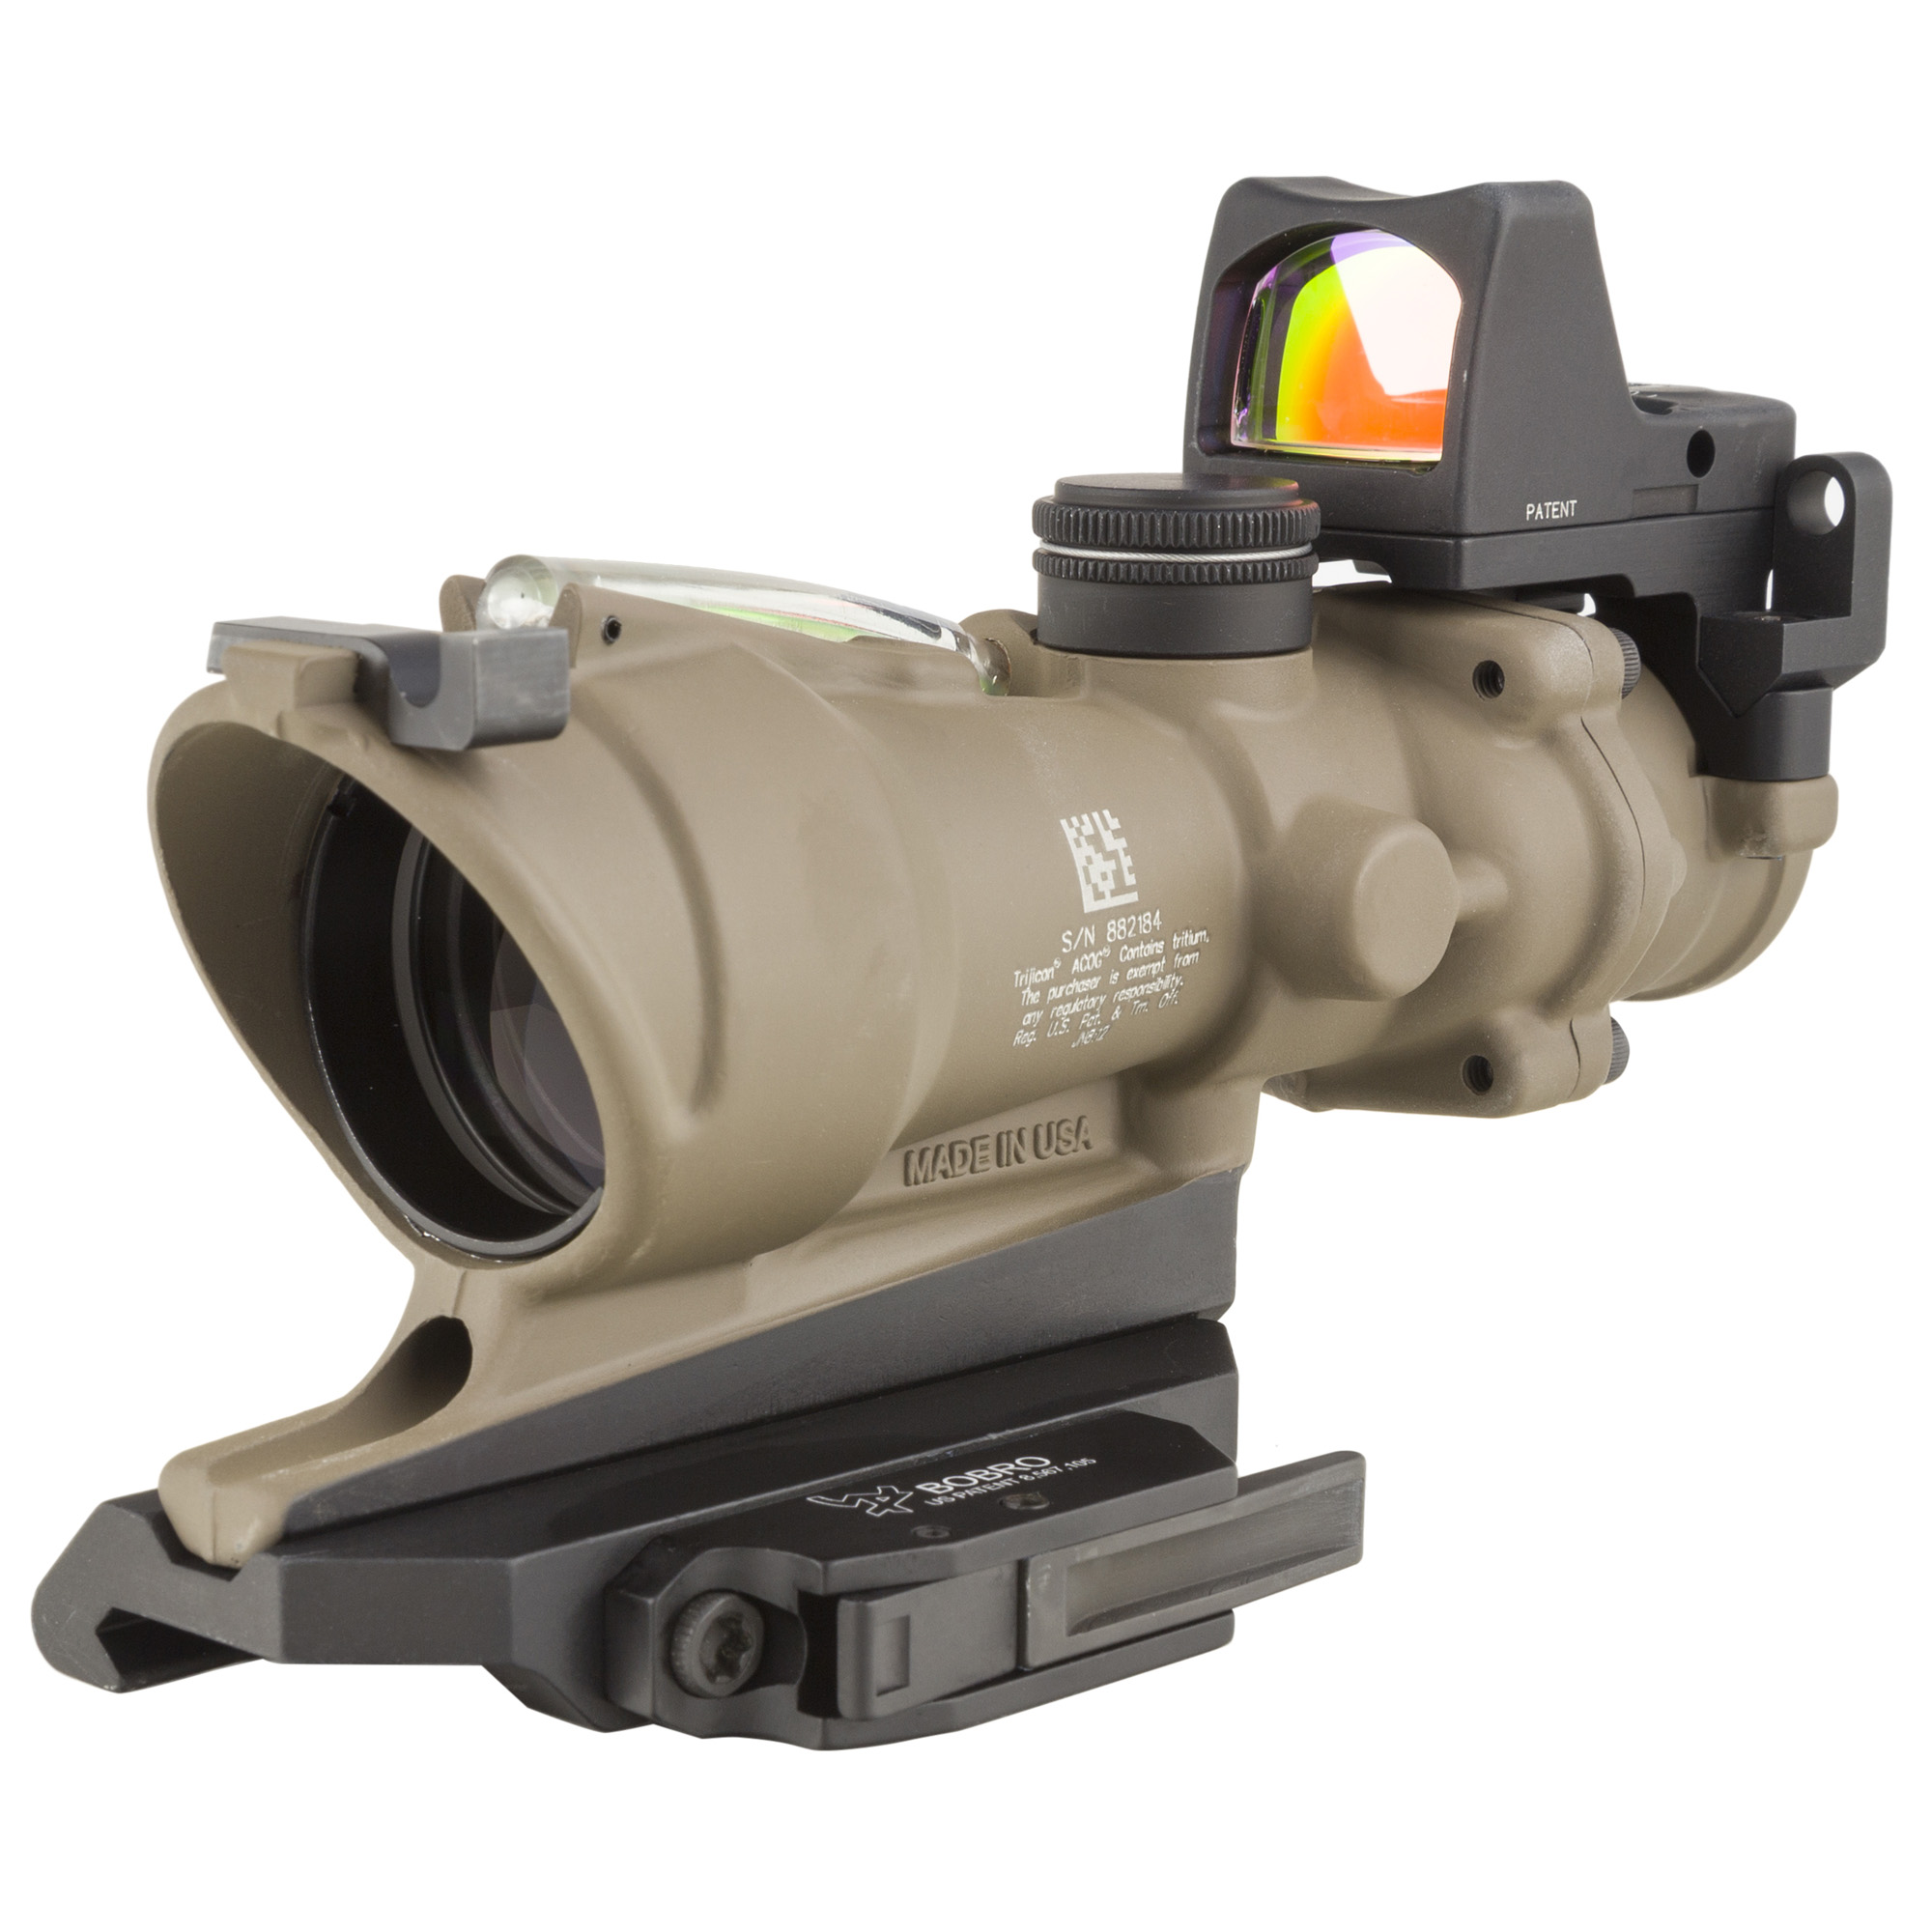 Trijicon 4x32 ACOG ECOS, Dual Illuminated Green Crosshair 5.56 Reticle with Backup Iron Sights, Quick Release Mount & LED,